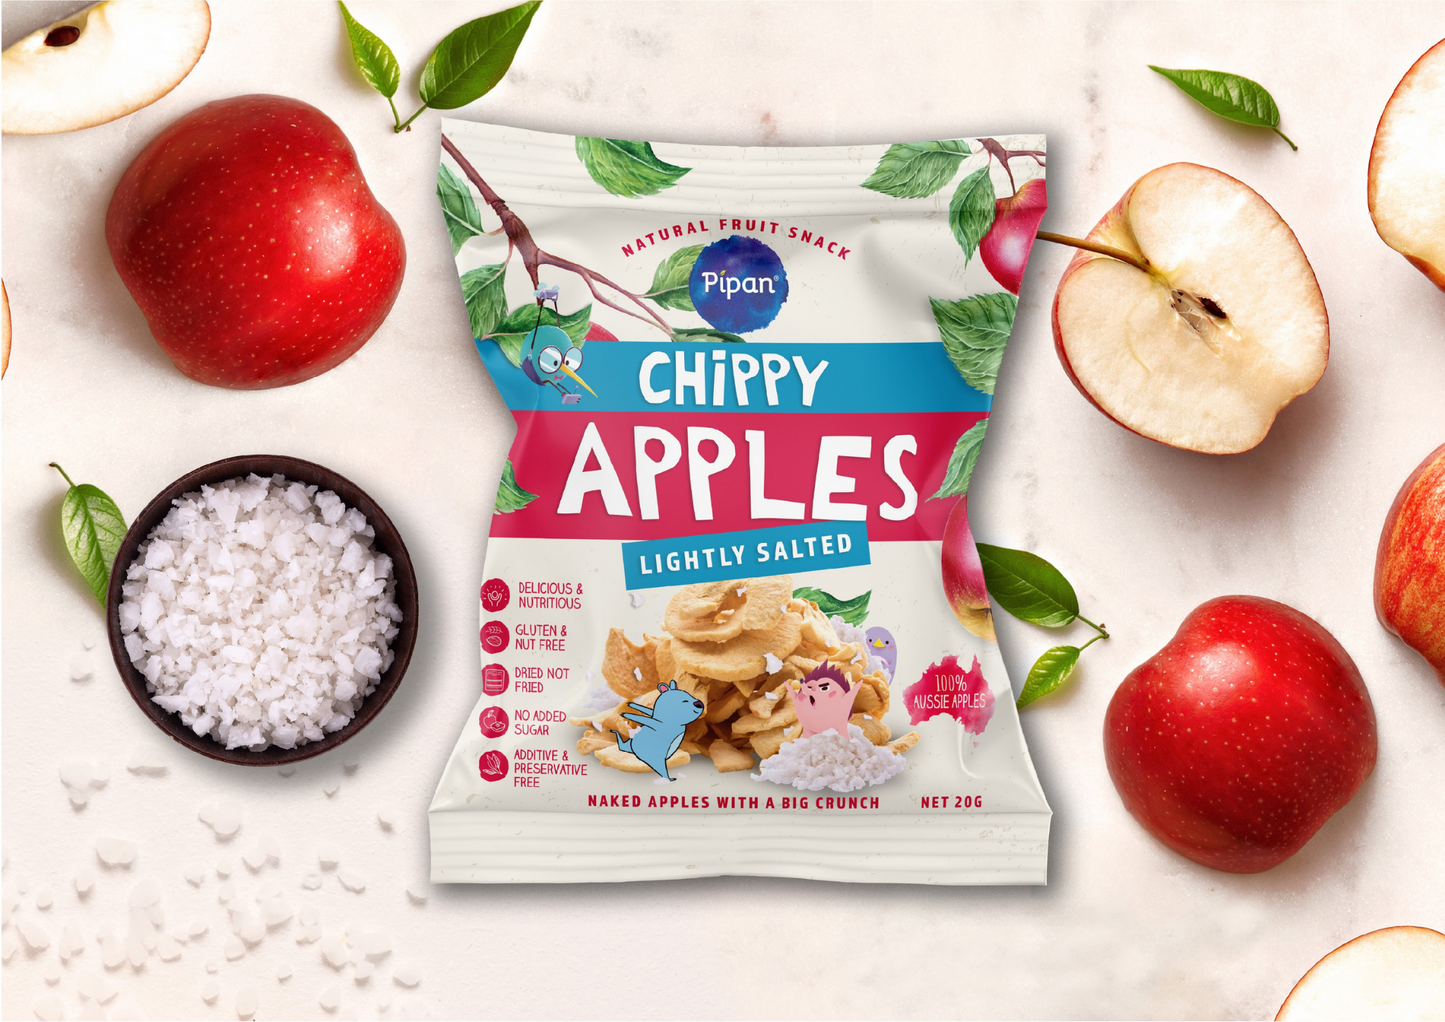 Chippy Apples Lightly Salted